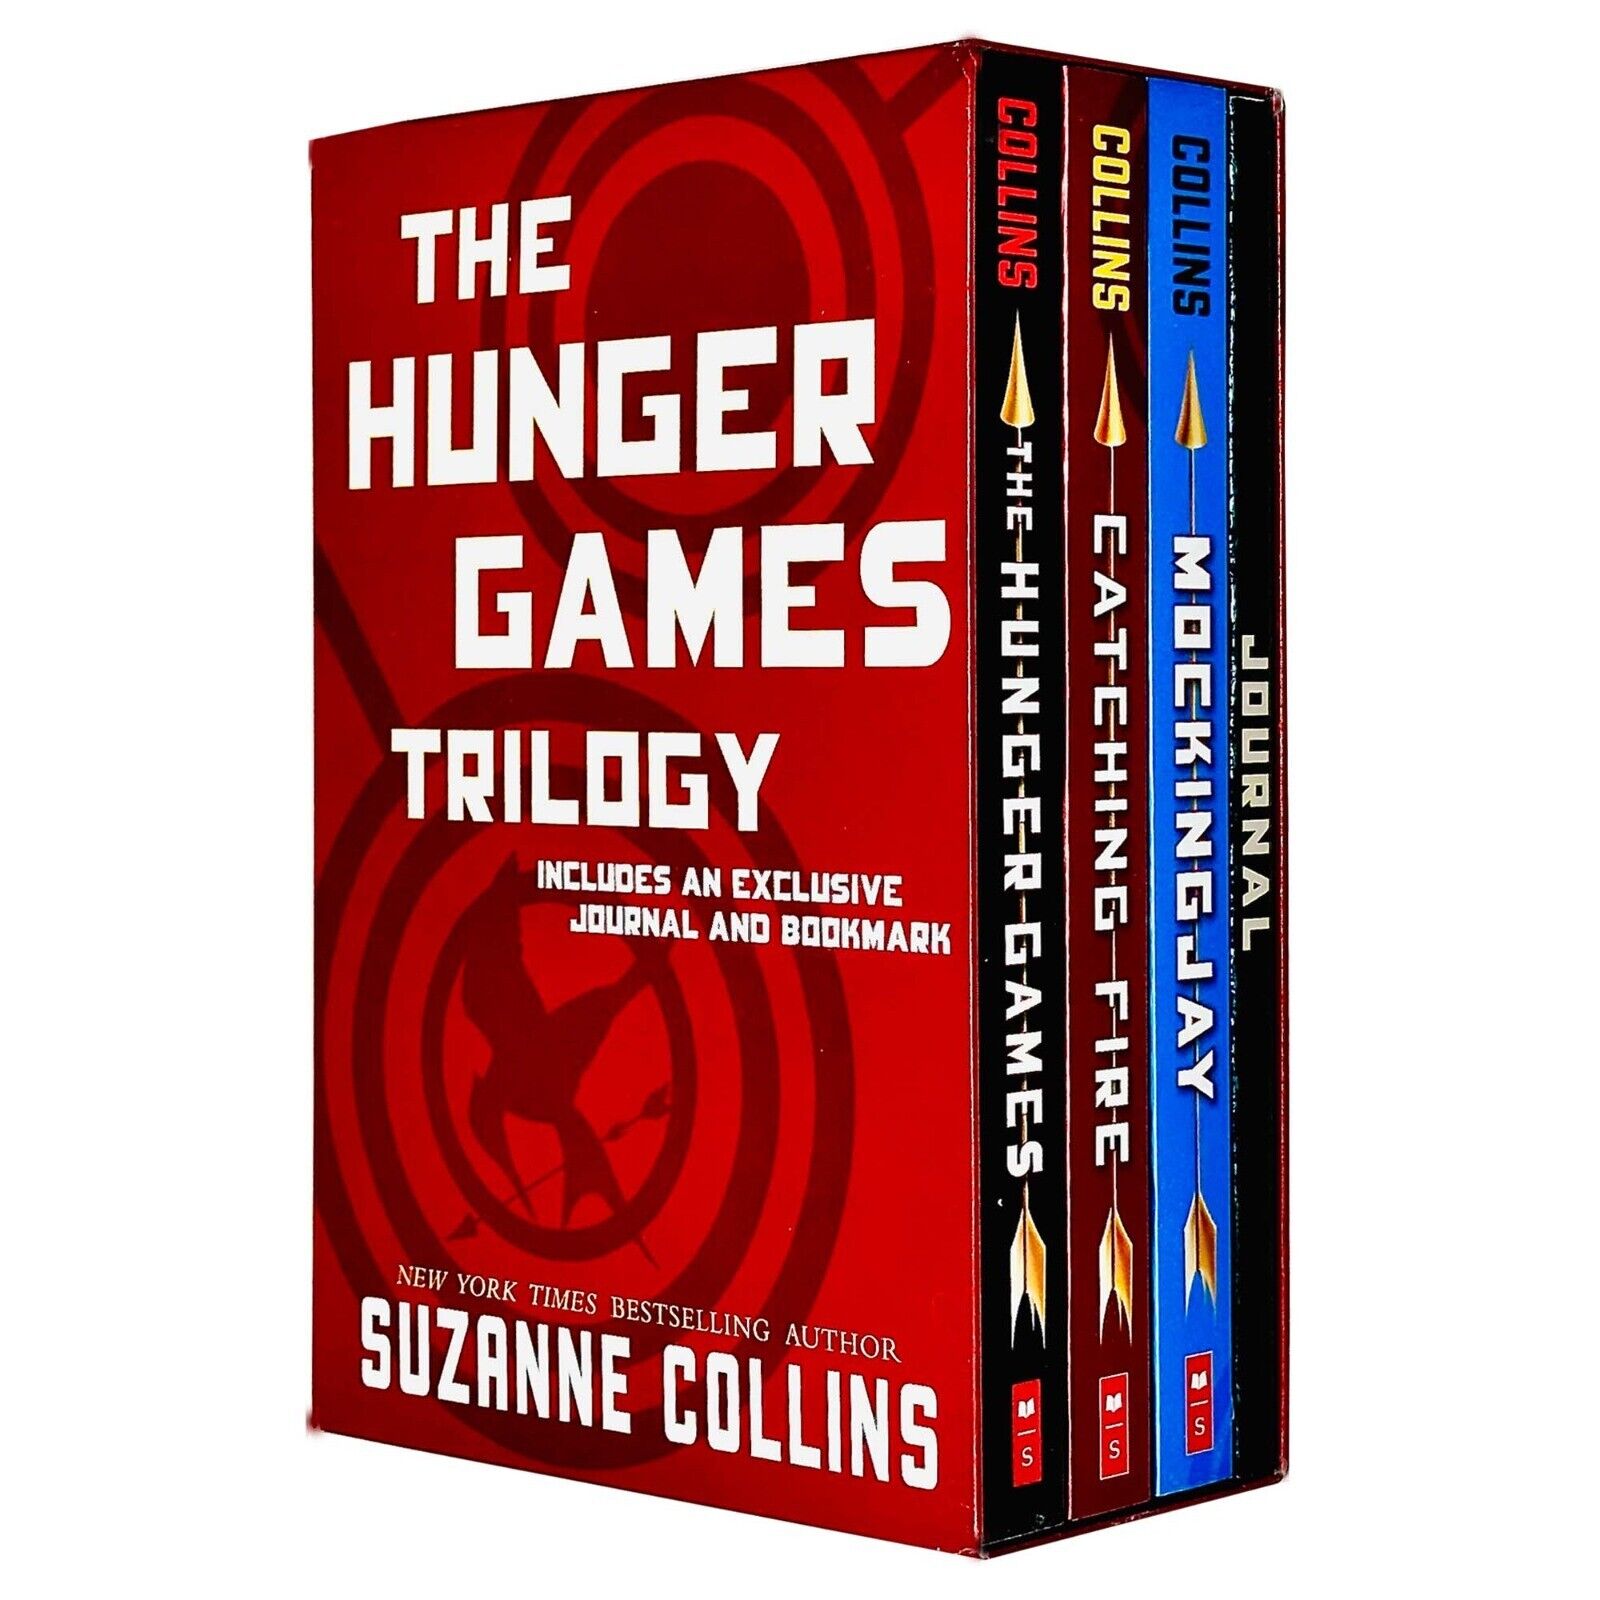 Hunger Games 1-4 HC Box Set by Suzanne Collins